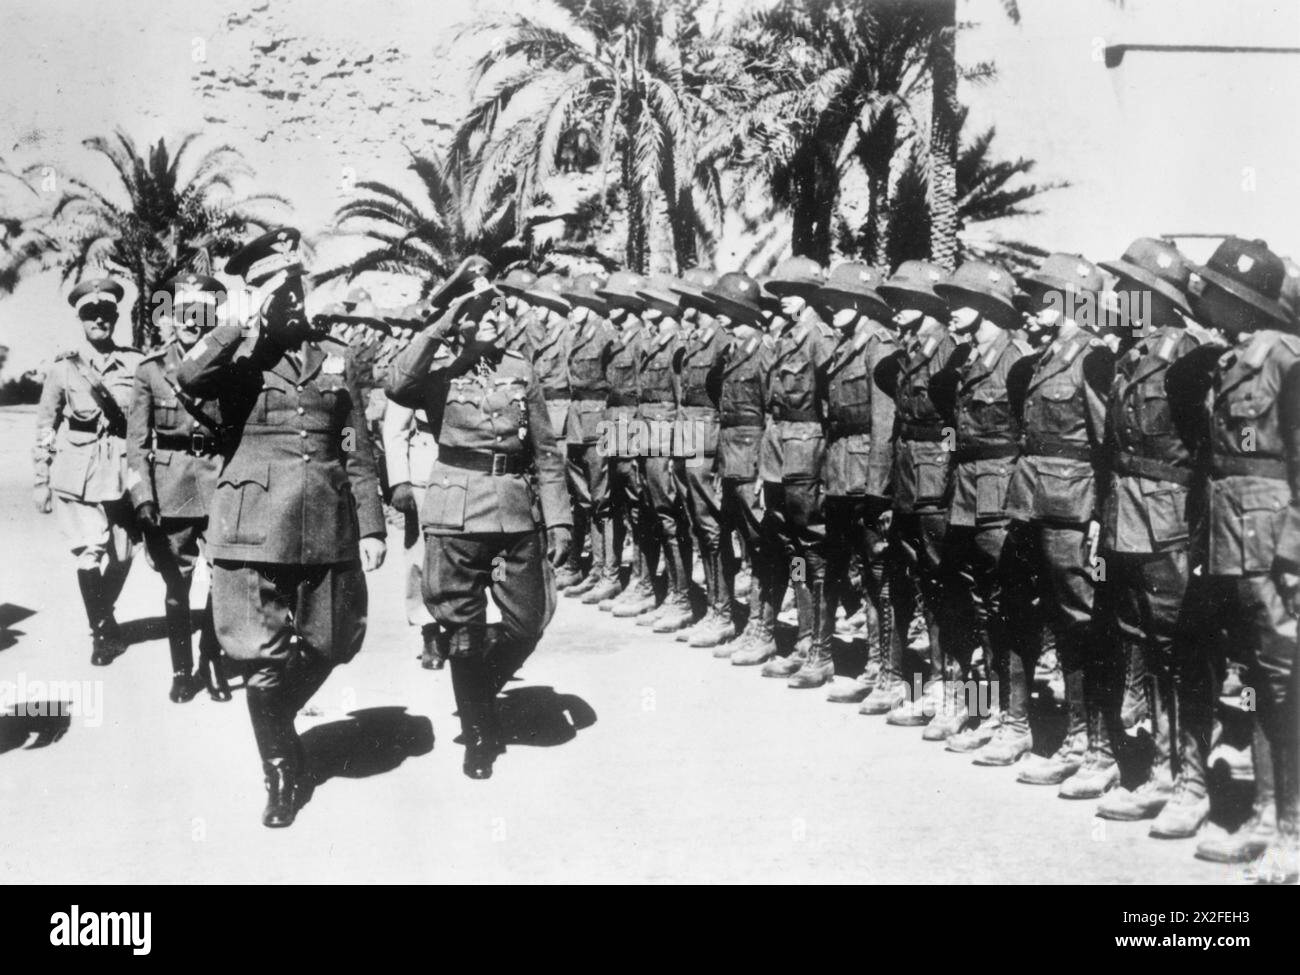 THE GERMAN ARMY IN THE WESTERN DESERT CAMPAIGN, 1941-1942 - General Erwin Rommel, the Commander of the German Afrika Korps, inspects his troops with General Garibaldo of Italy shortly after their arrival in North Africa, 21-31march 1941. The troops are wearing pith helmets German Army, Italian Army, Rommel, Erwin Johannes Eugen Stock Photo